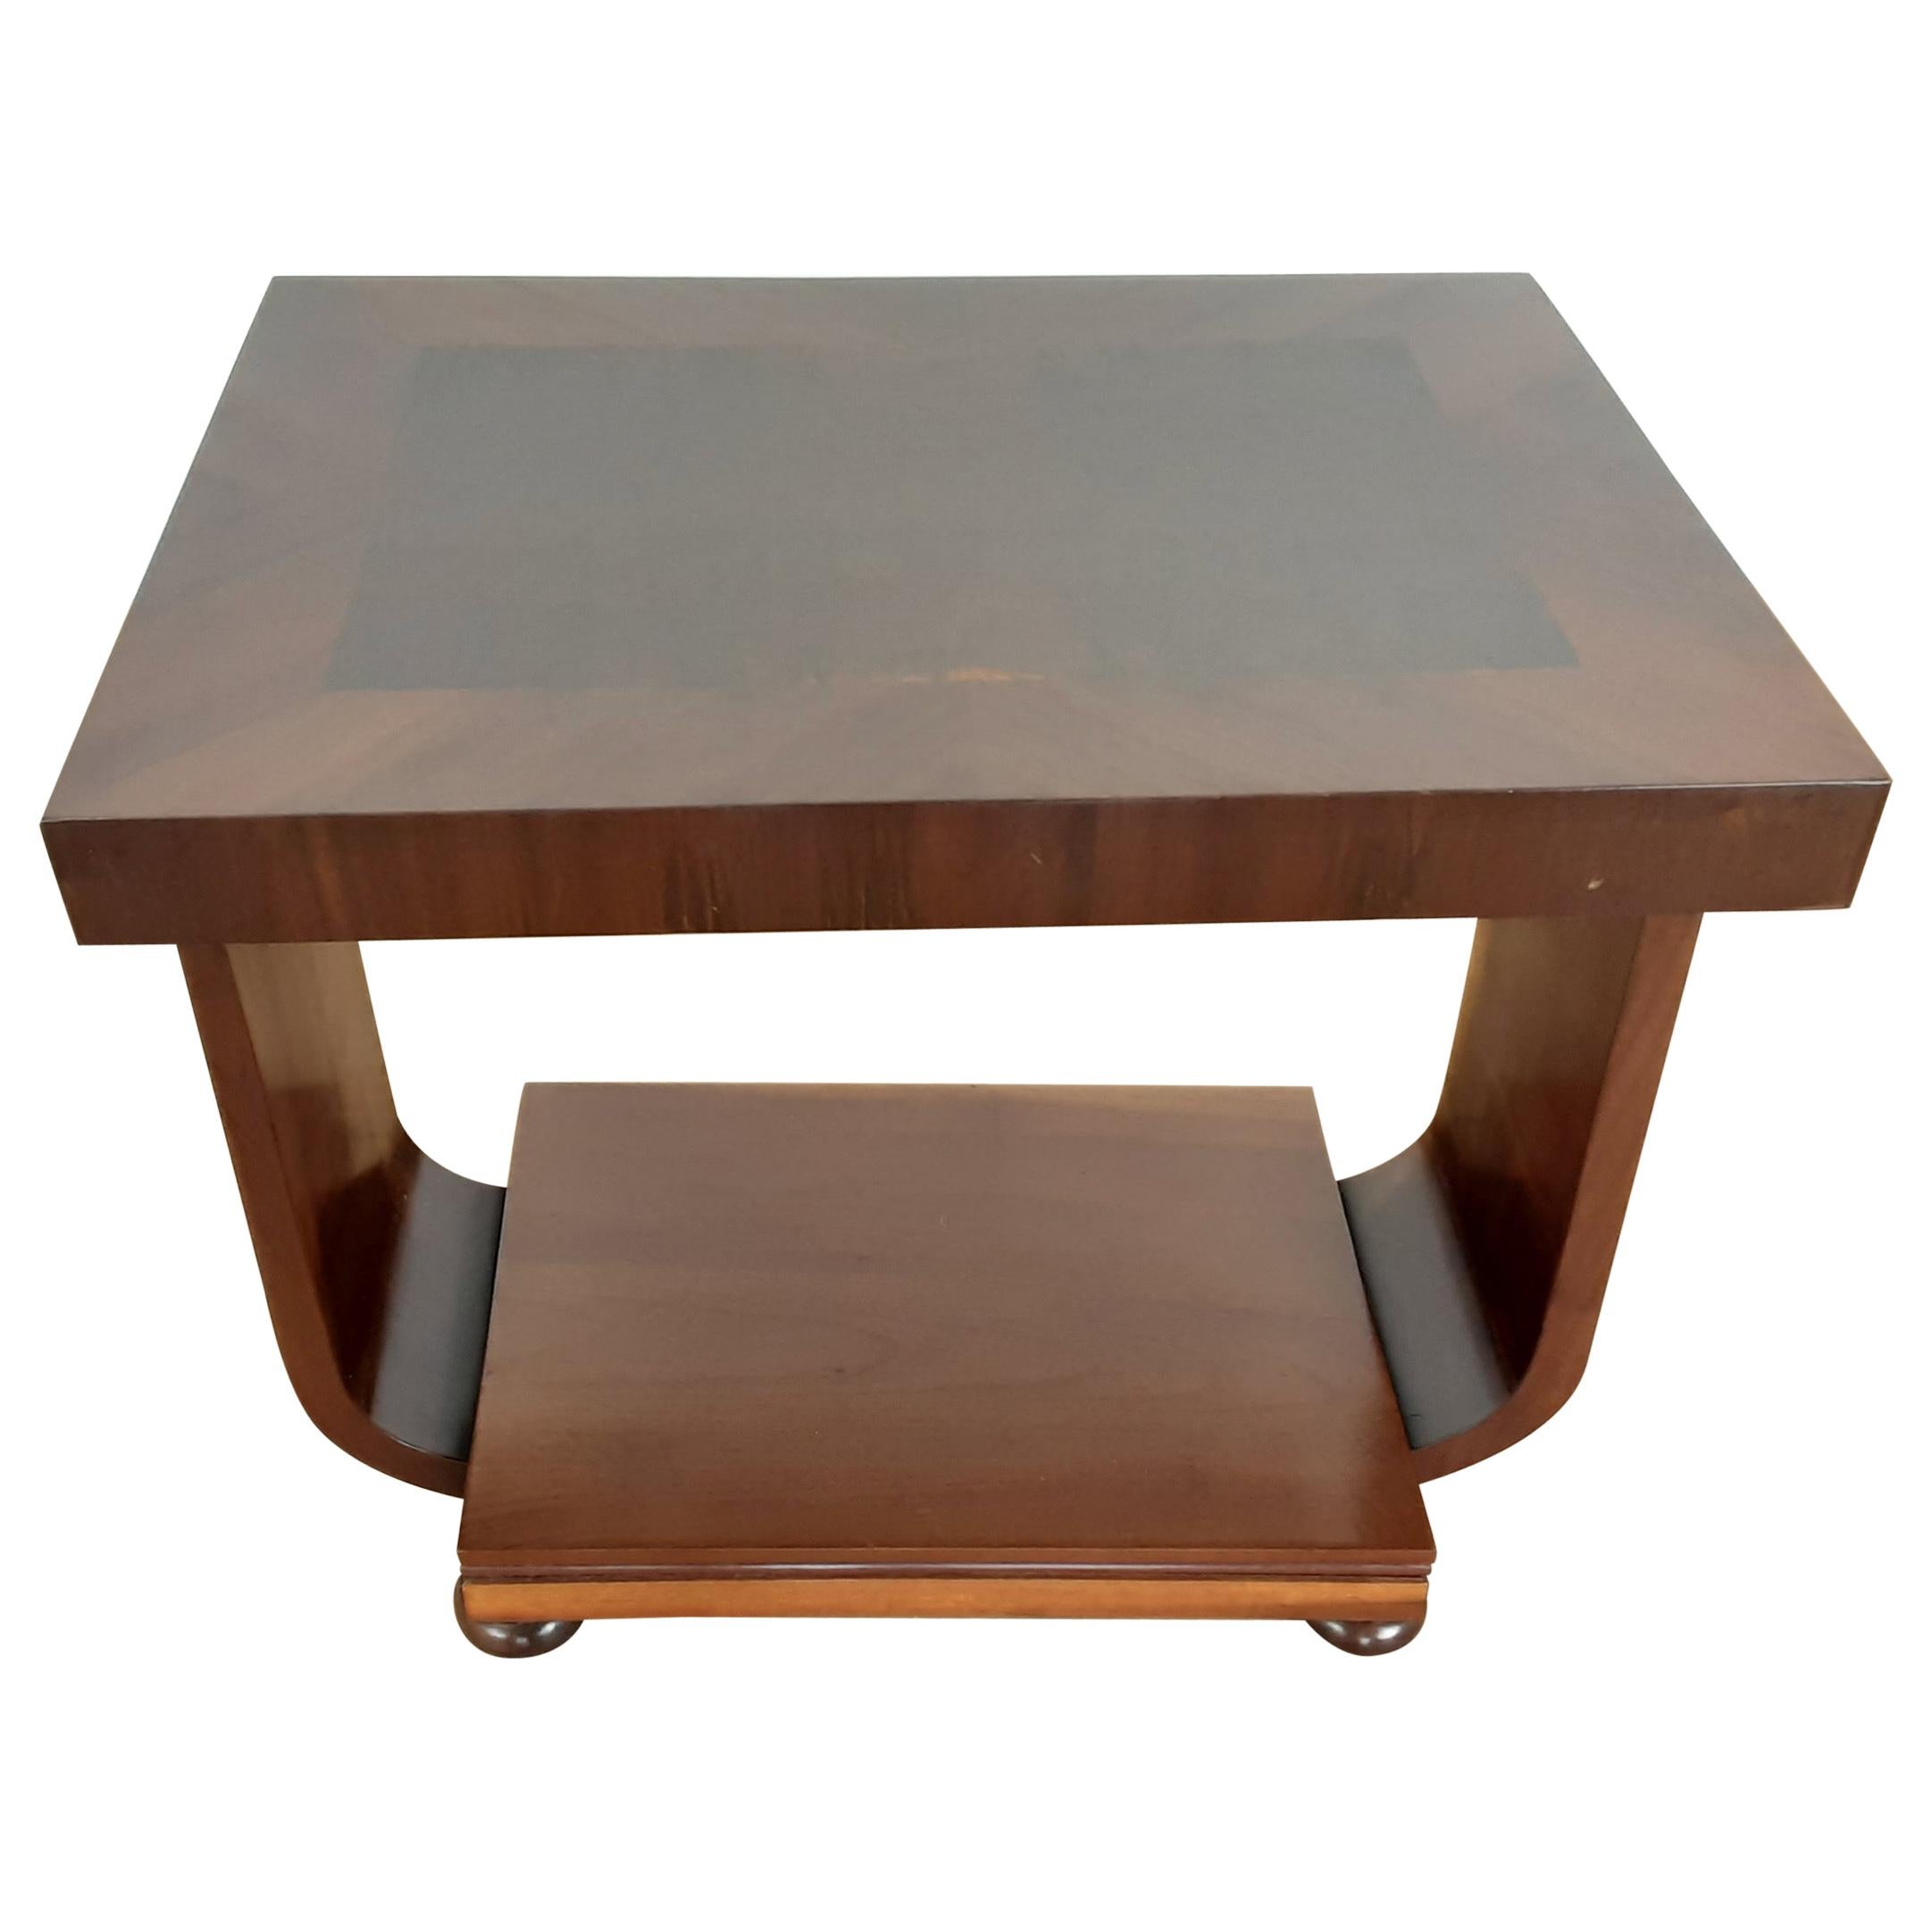 British Art Deco Table in a Burr Walnut For Sale